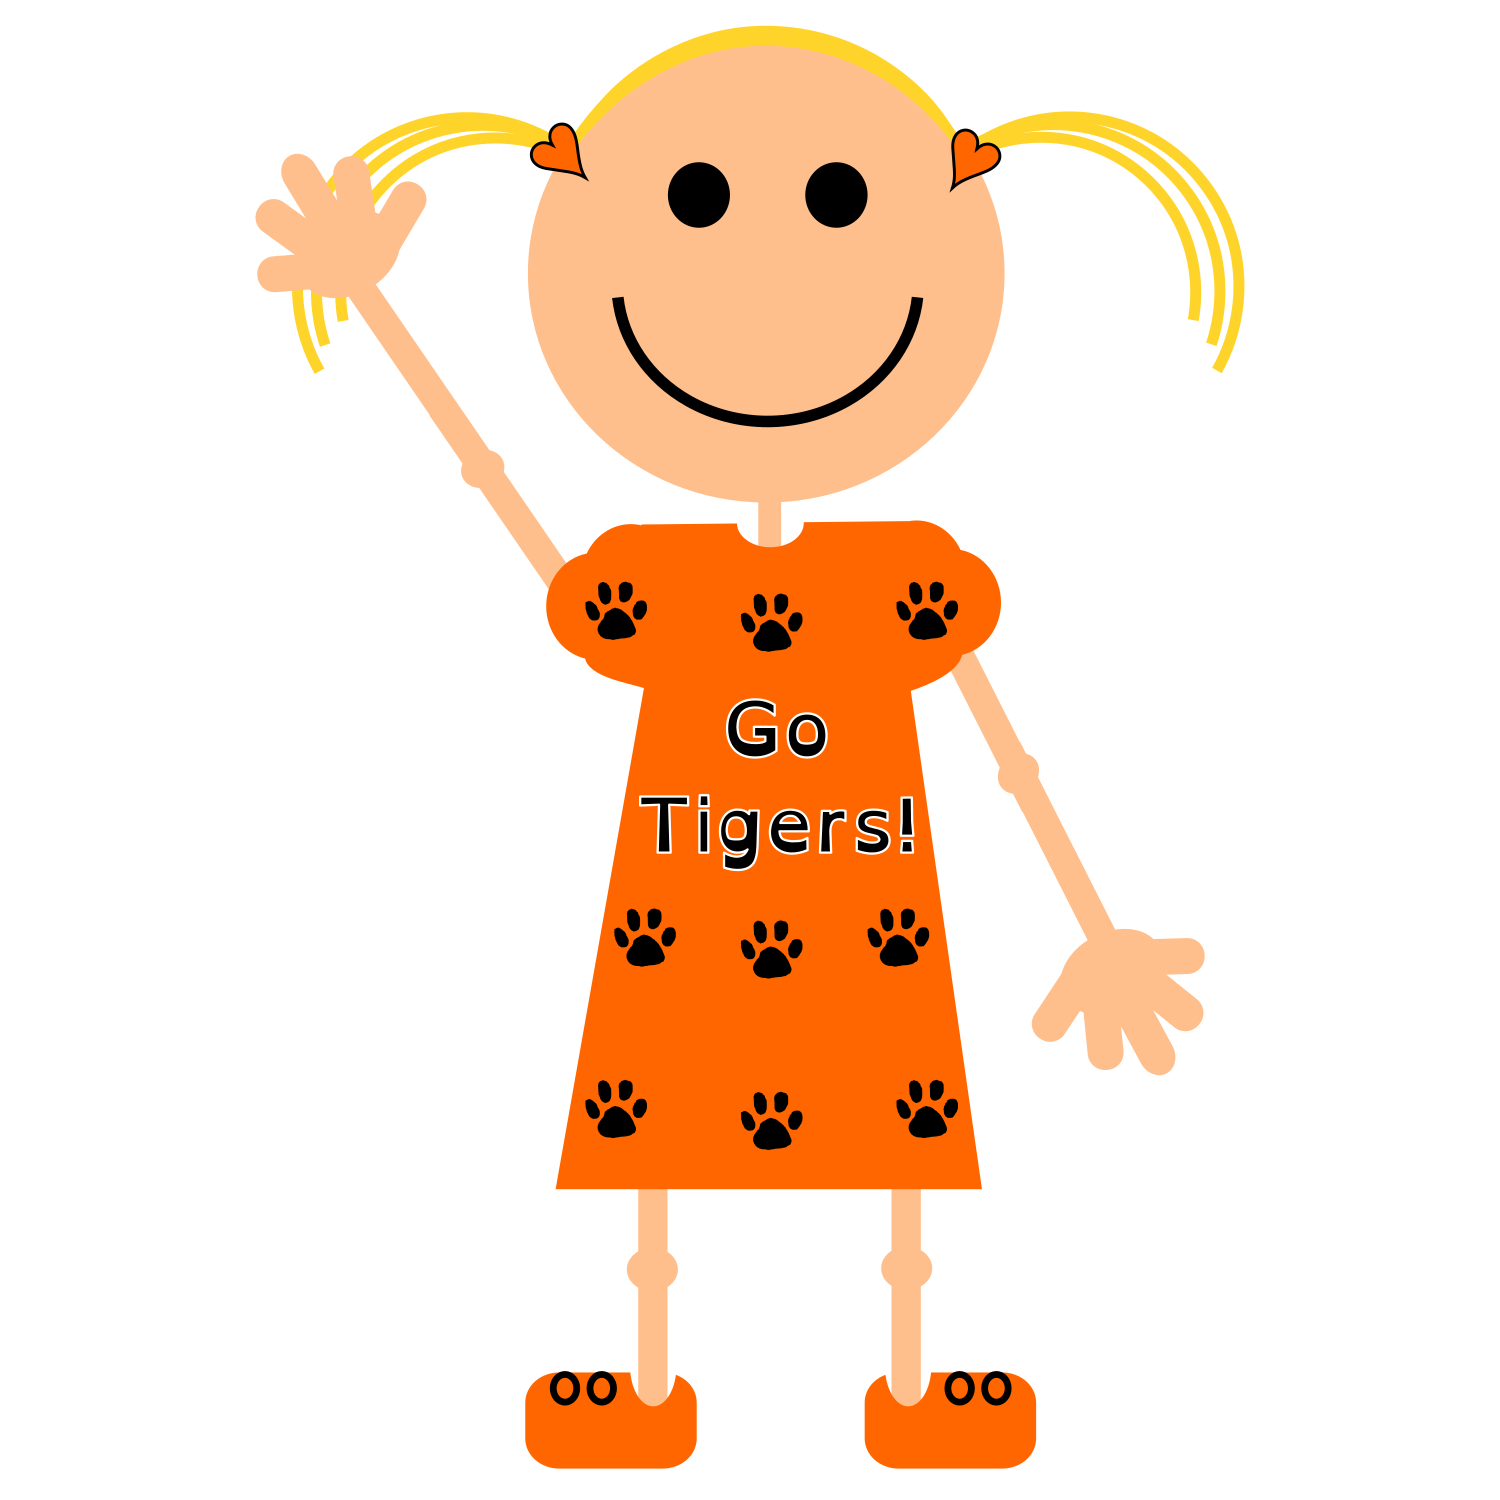 Cartoon image of a girl waving, with a dress that reads "Go Tigers!" Image created by Heather Thompson. 